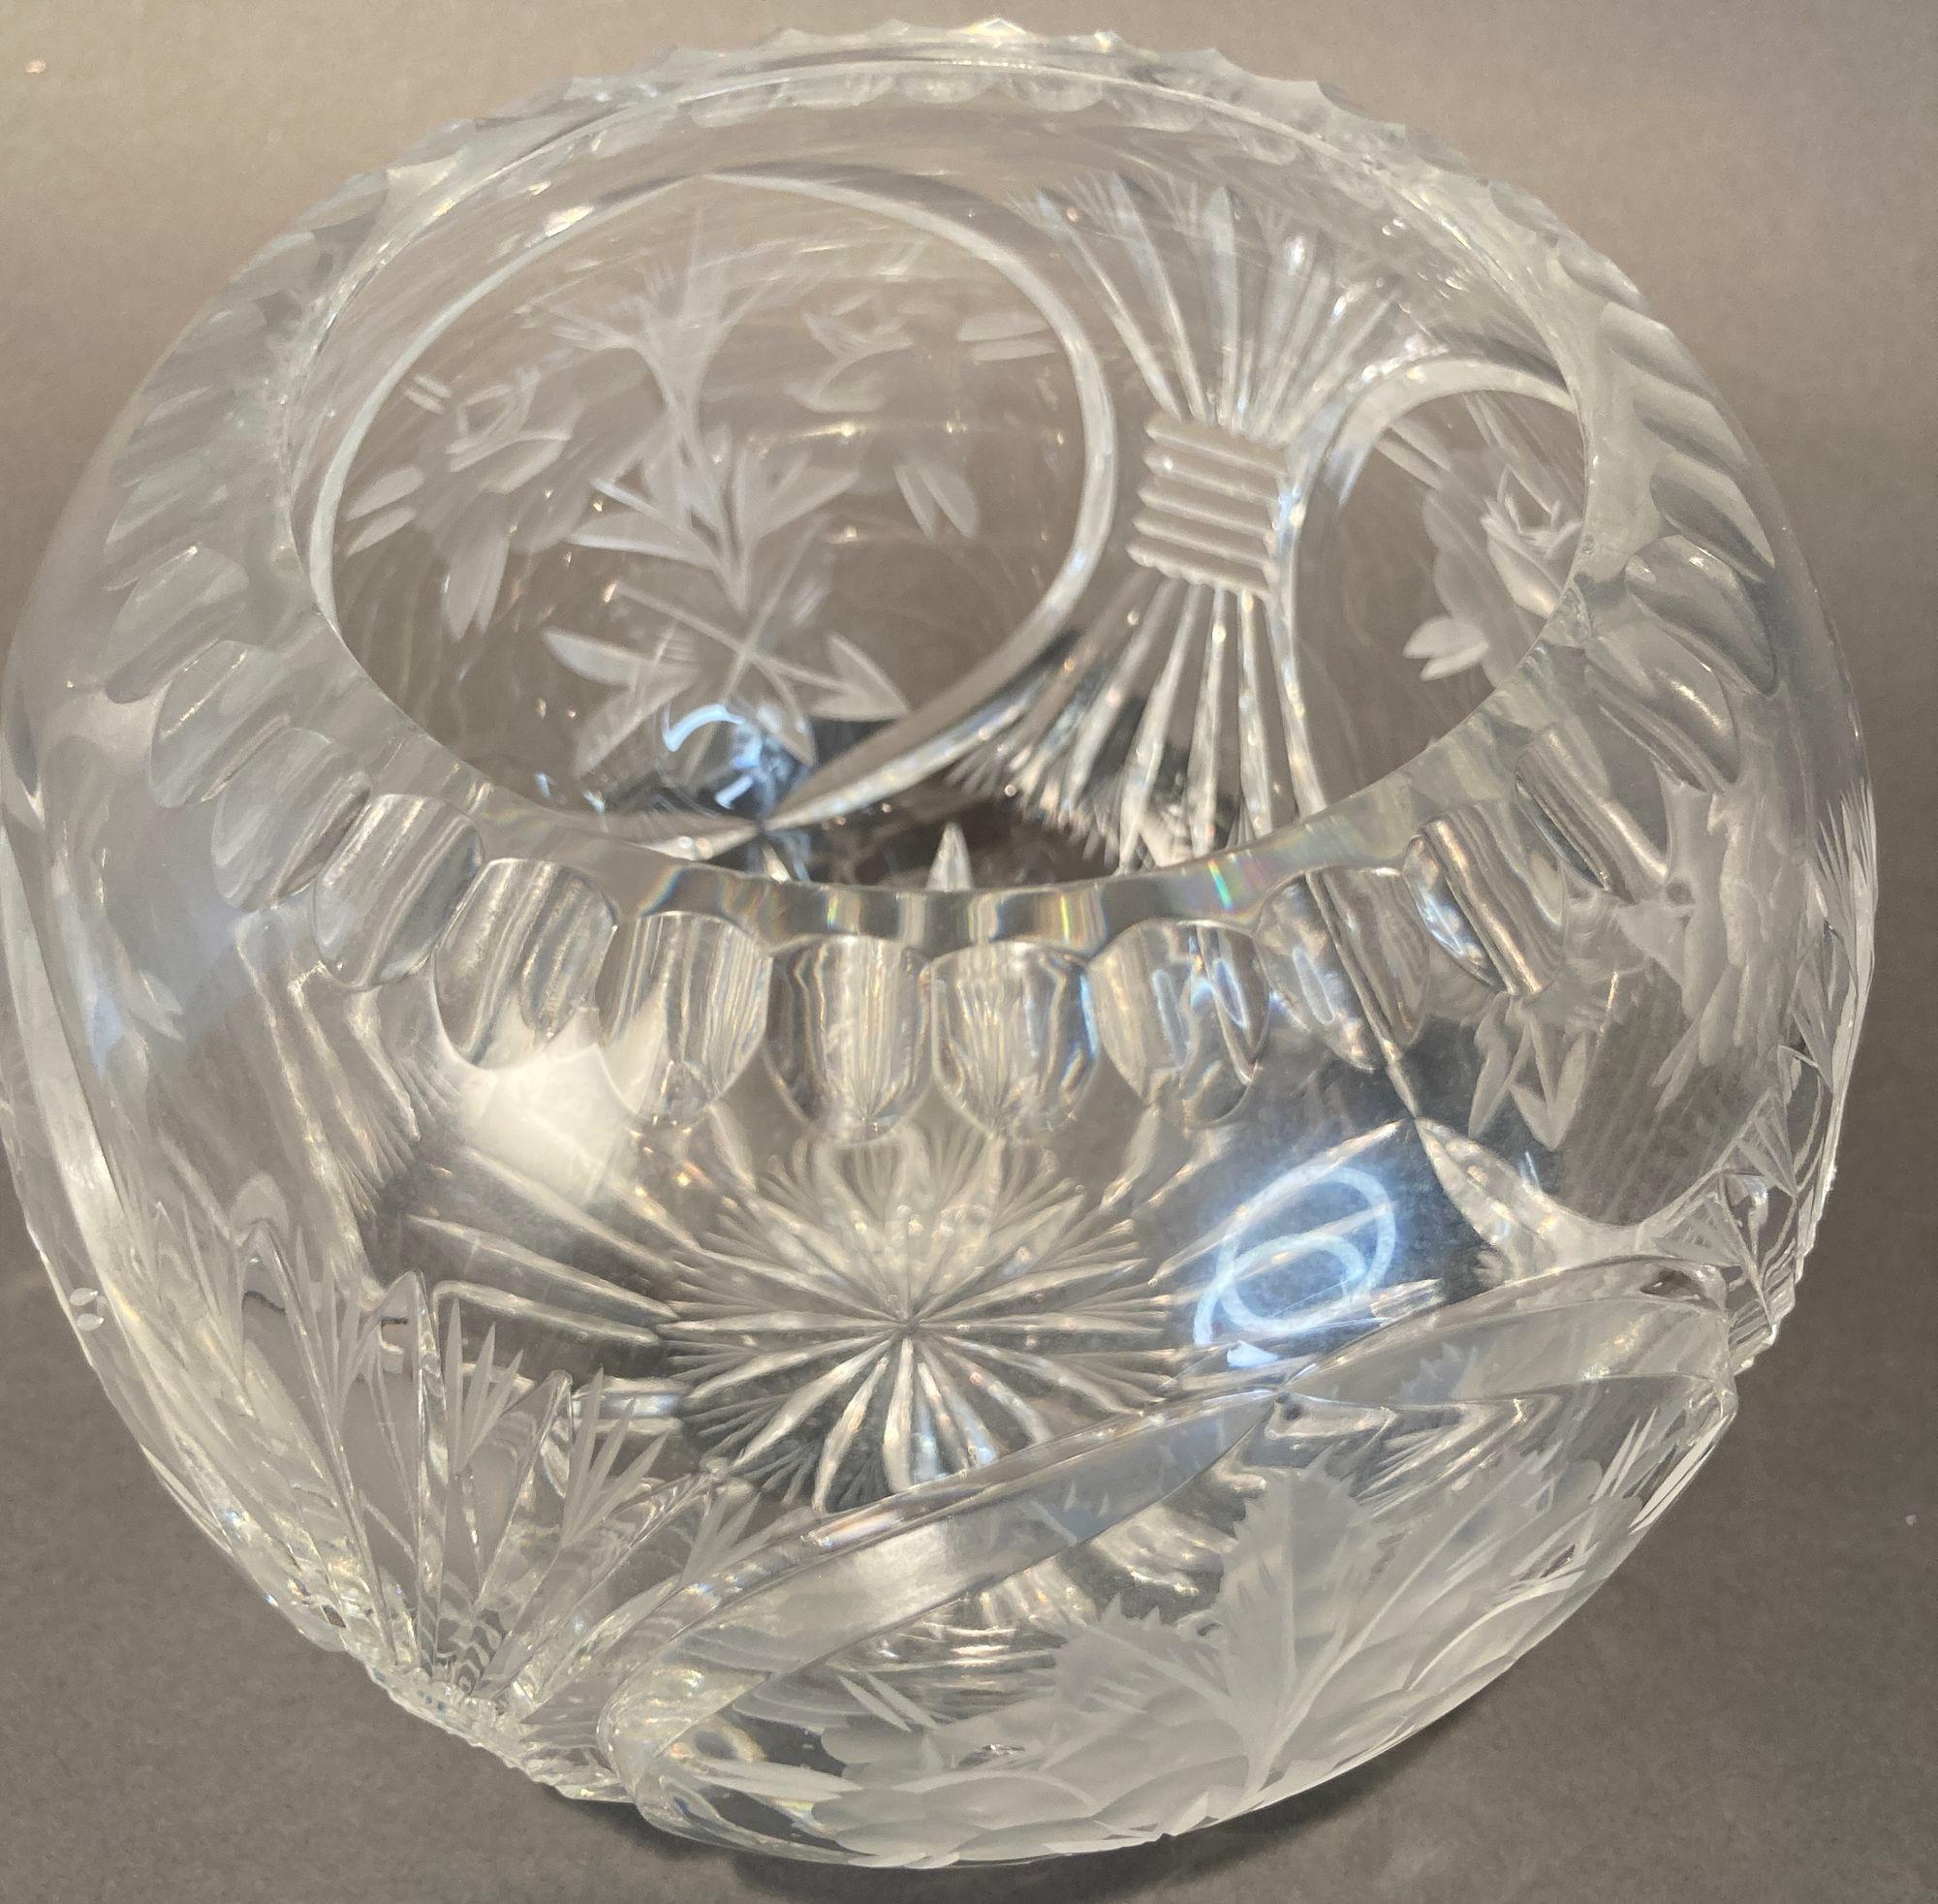 Vintage crystal rose bowl with etched Roses design.
A stunning heavy thick deep cut globe crystal flower rose bowl on a diamond and wedge cut pattern with etched roses design.
This elegant crystal quality Rose Decorative Bowl was crafted in Europe,